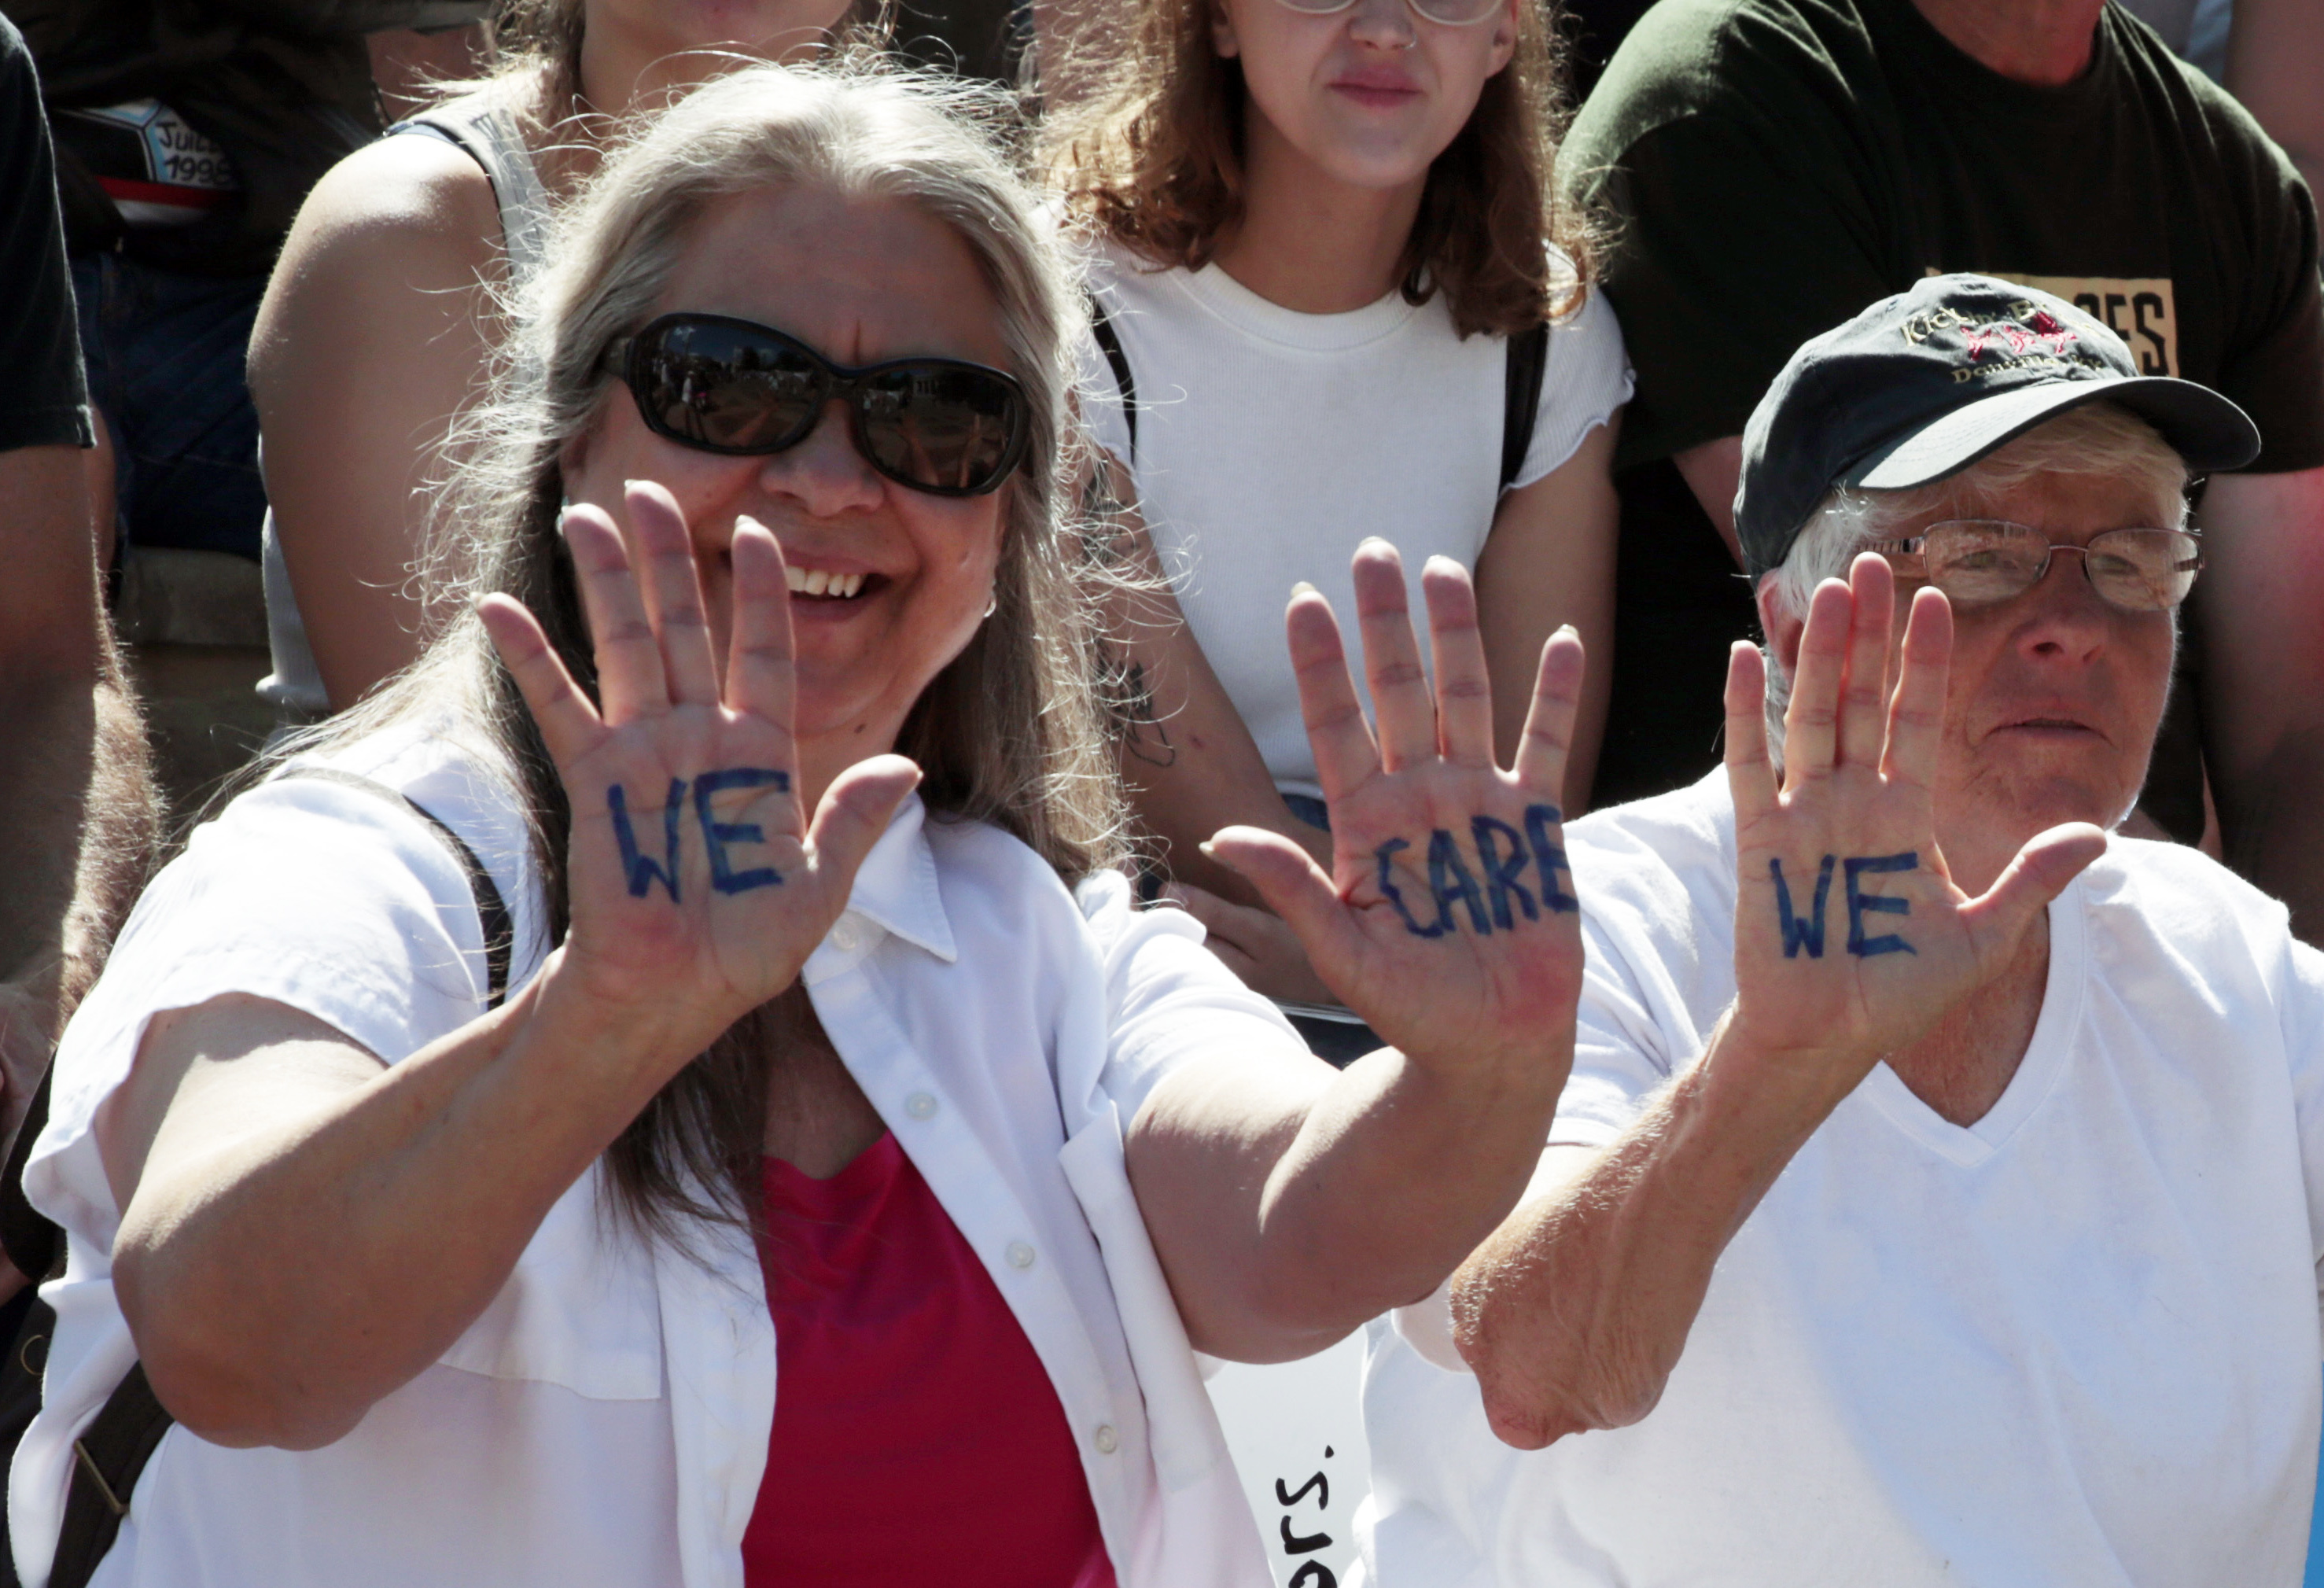 Two women hold up their hands in protest during an immigration rally and protest in Civic Center Park Saturday, June 30, 2018, in downtown Denver. The protest was one of hundreds staged nationwide that has brought liberal activists, parents and first-time protesters--motivated by accounts of children separated from their parents at the US-Mexico border--to press President Donald Trump to reunite families quickly. (AP Photo/David Zalubowski)